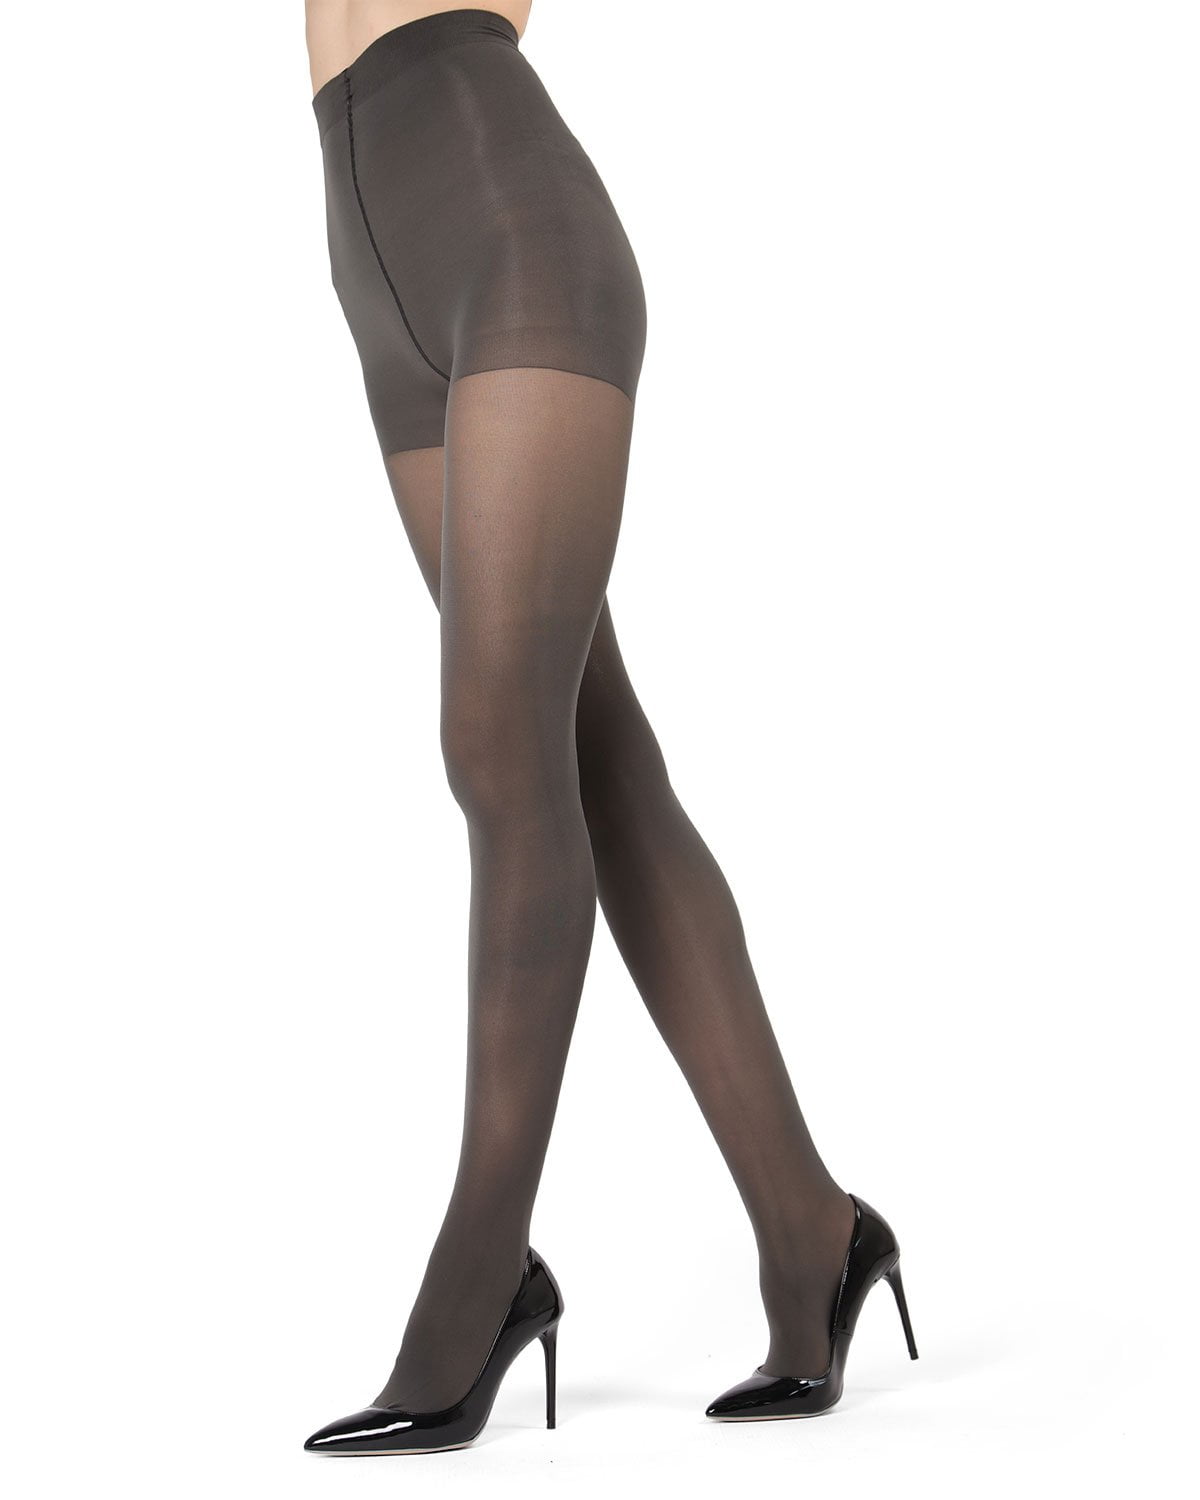 Lady Sofia Womens Opaque Footless Tights 60 Denier Full Length 